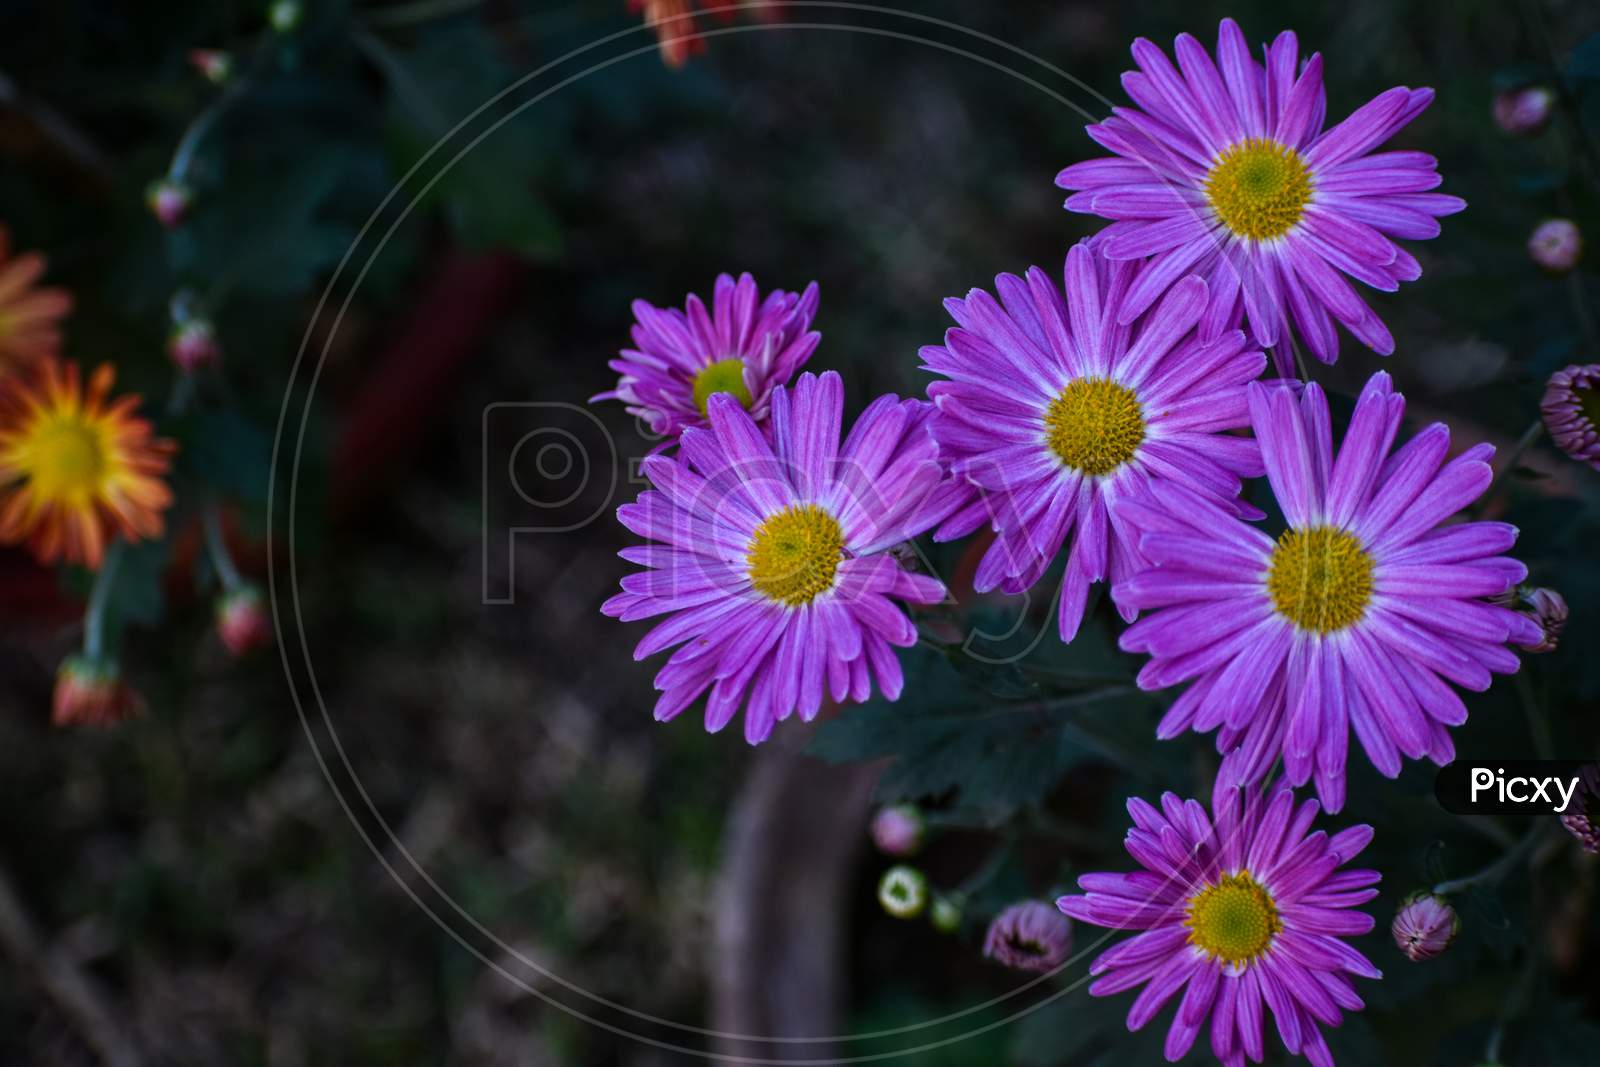 Selective Focus On A Fresh Violet Calendula Flower In A Garden With Background Blur